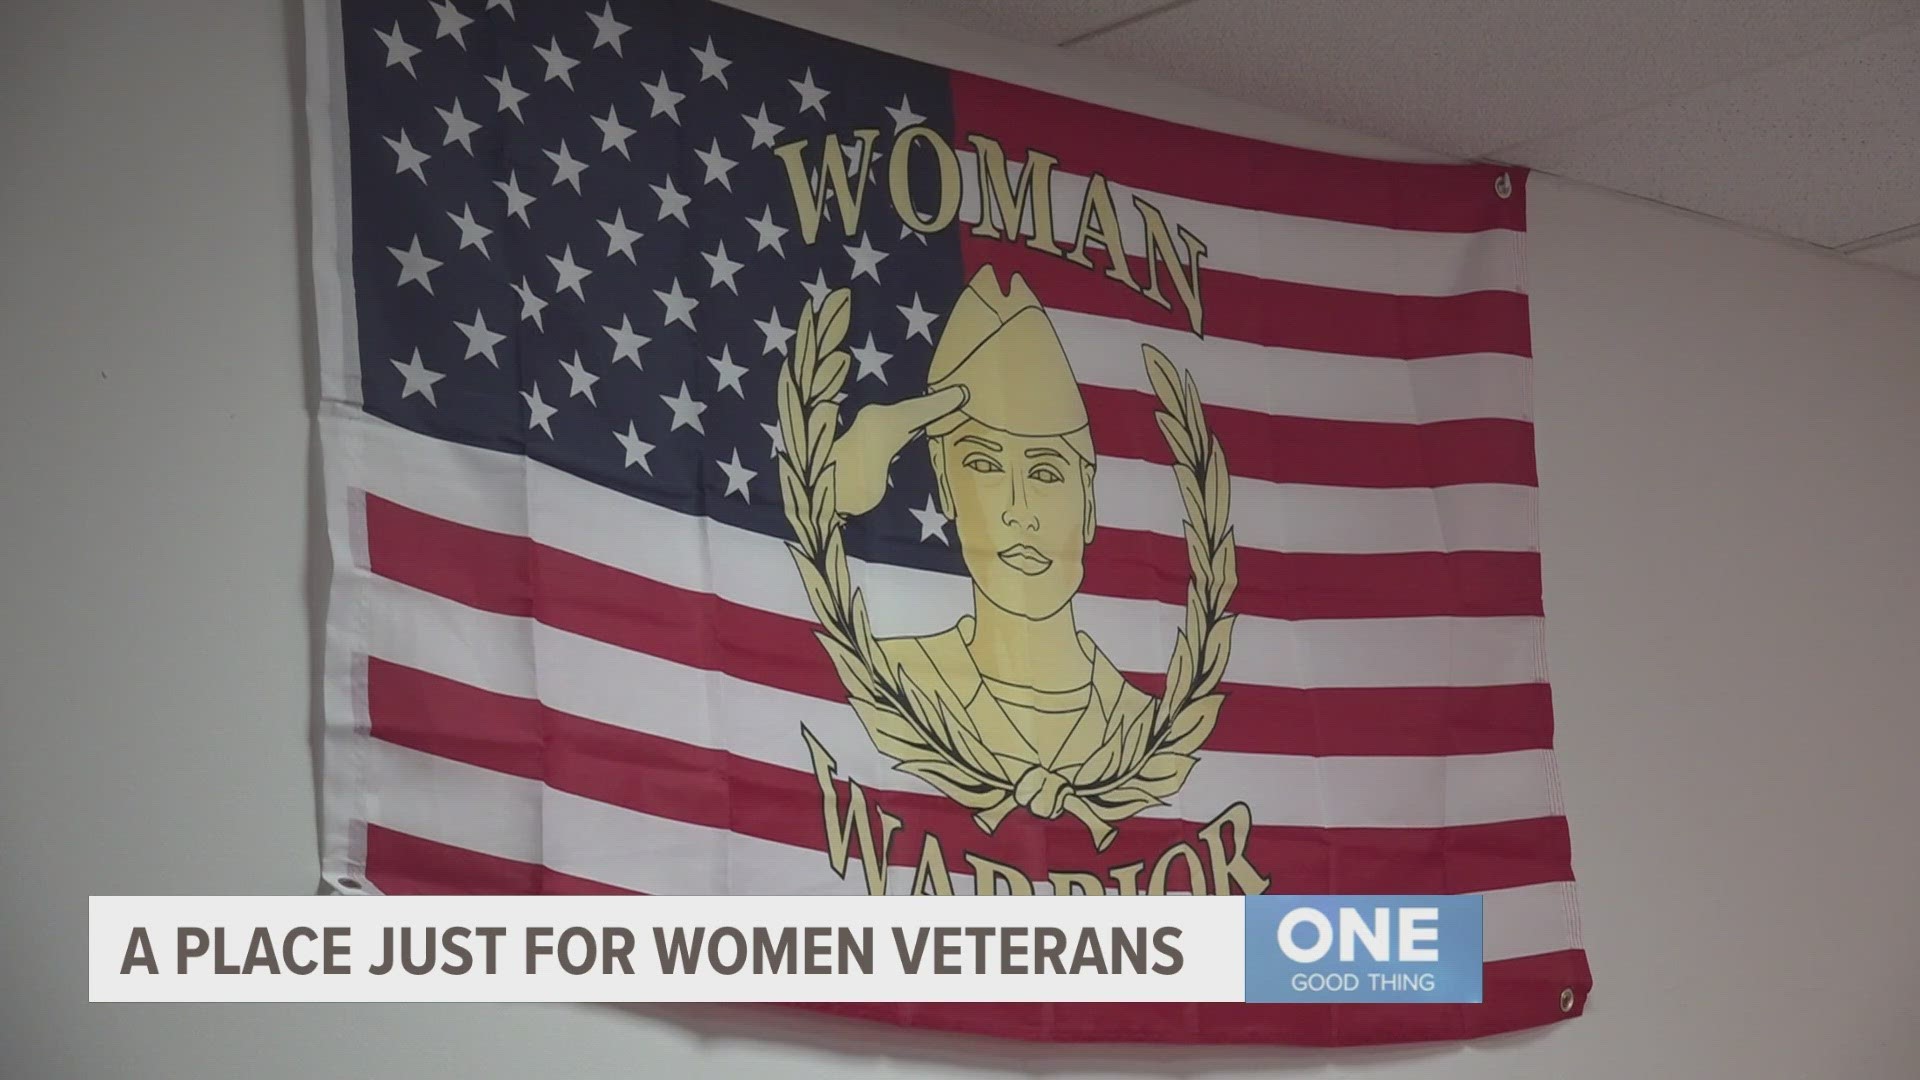 It is Women's History Month and an organization in Kentwood recently celebrated the opening of a place specifically for women who have shaped history by serving.